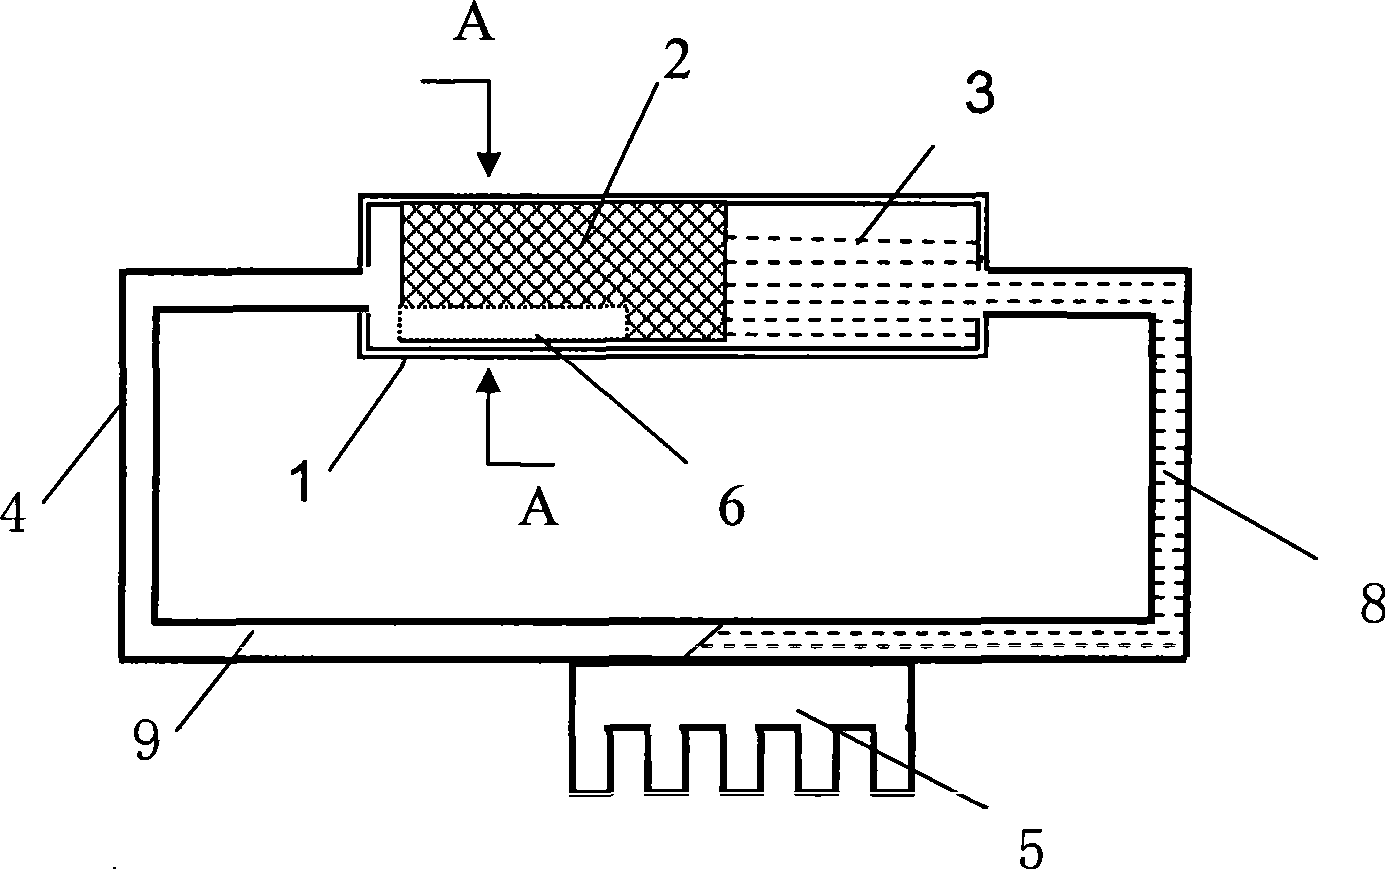 Loop type heat pipe radiator and manufacturing method thereof